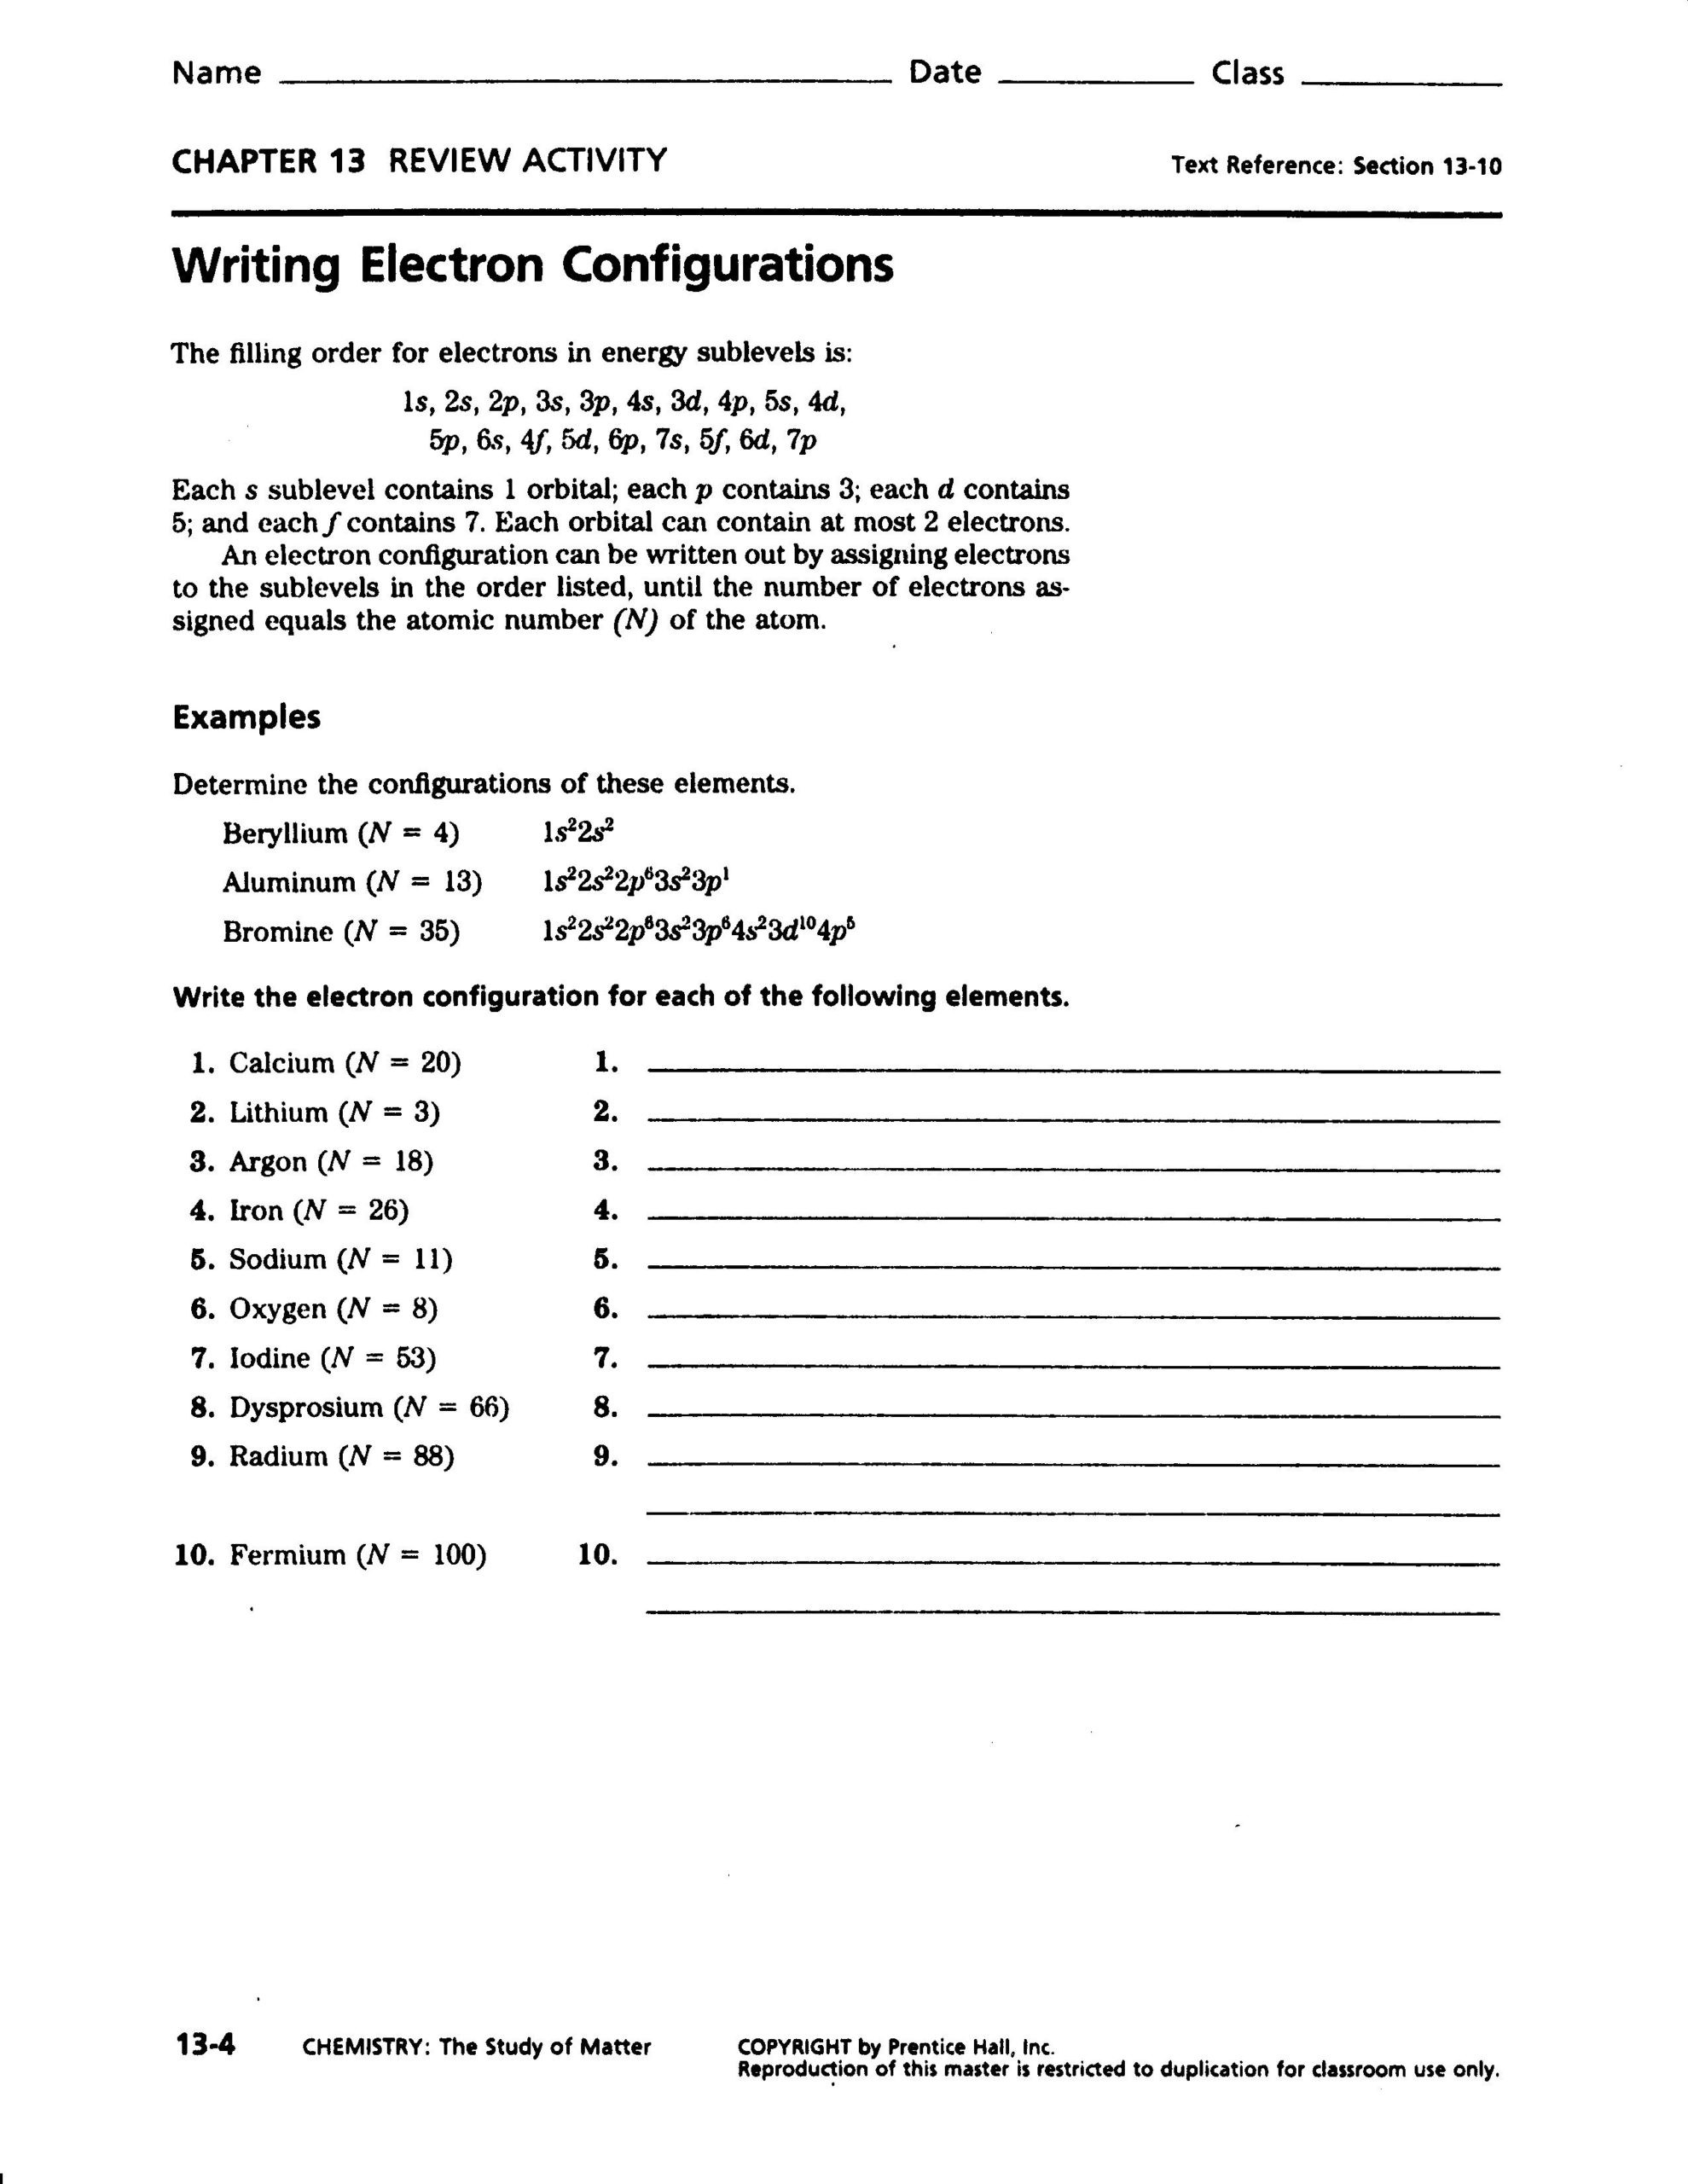 Conditional Statement Worksheet Geometry Logic Puzzle Games Capitalization Worksheets Prentice Hall